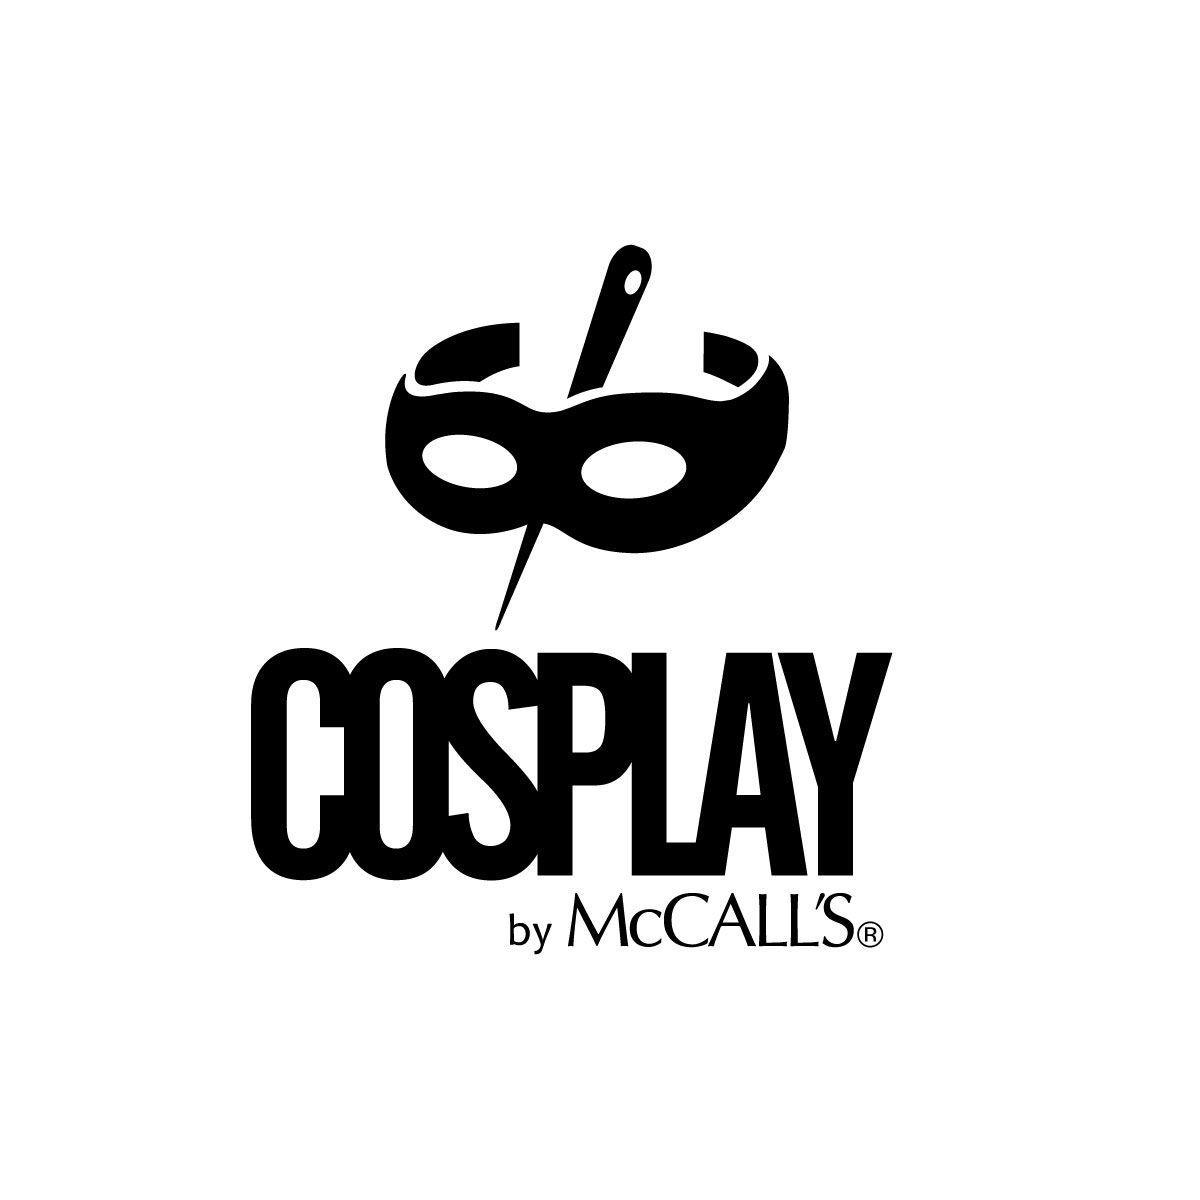 McCall's Logo - Cosplay by McCall's” Introduces Trio of Innovative New Sewing Patterns